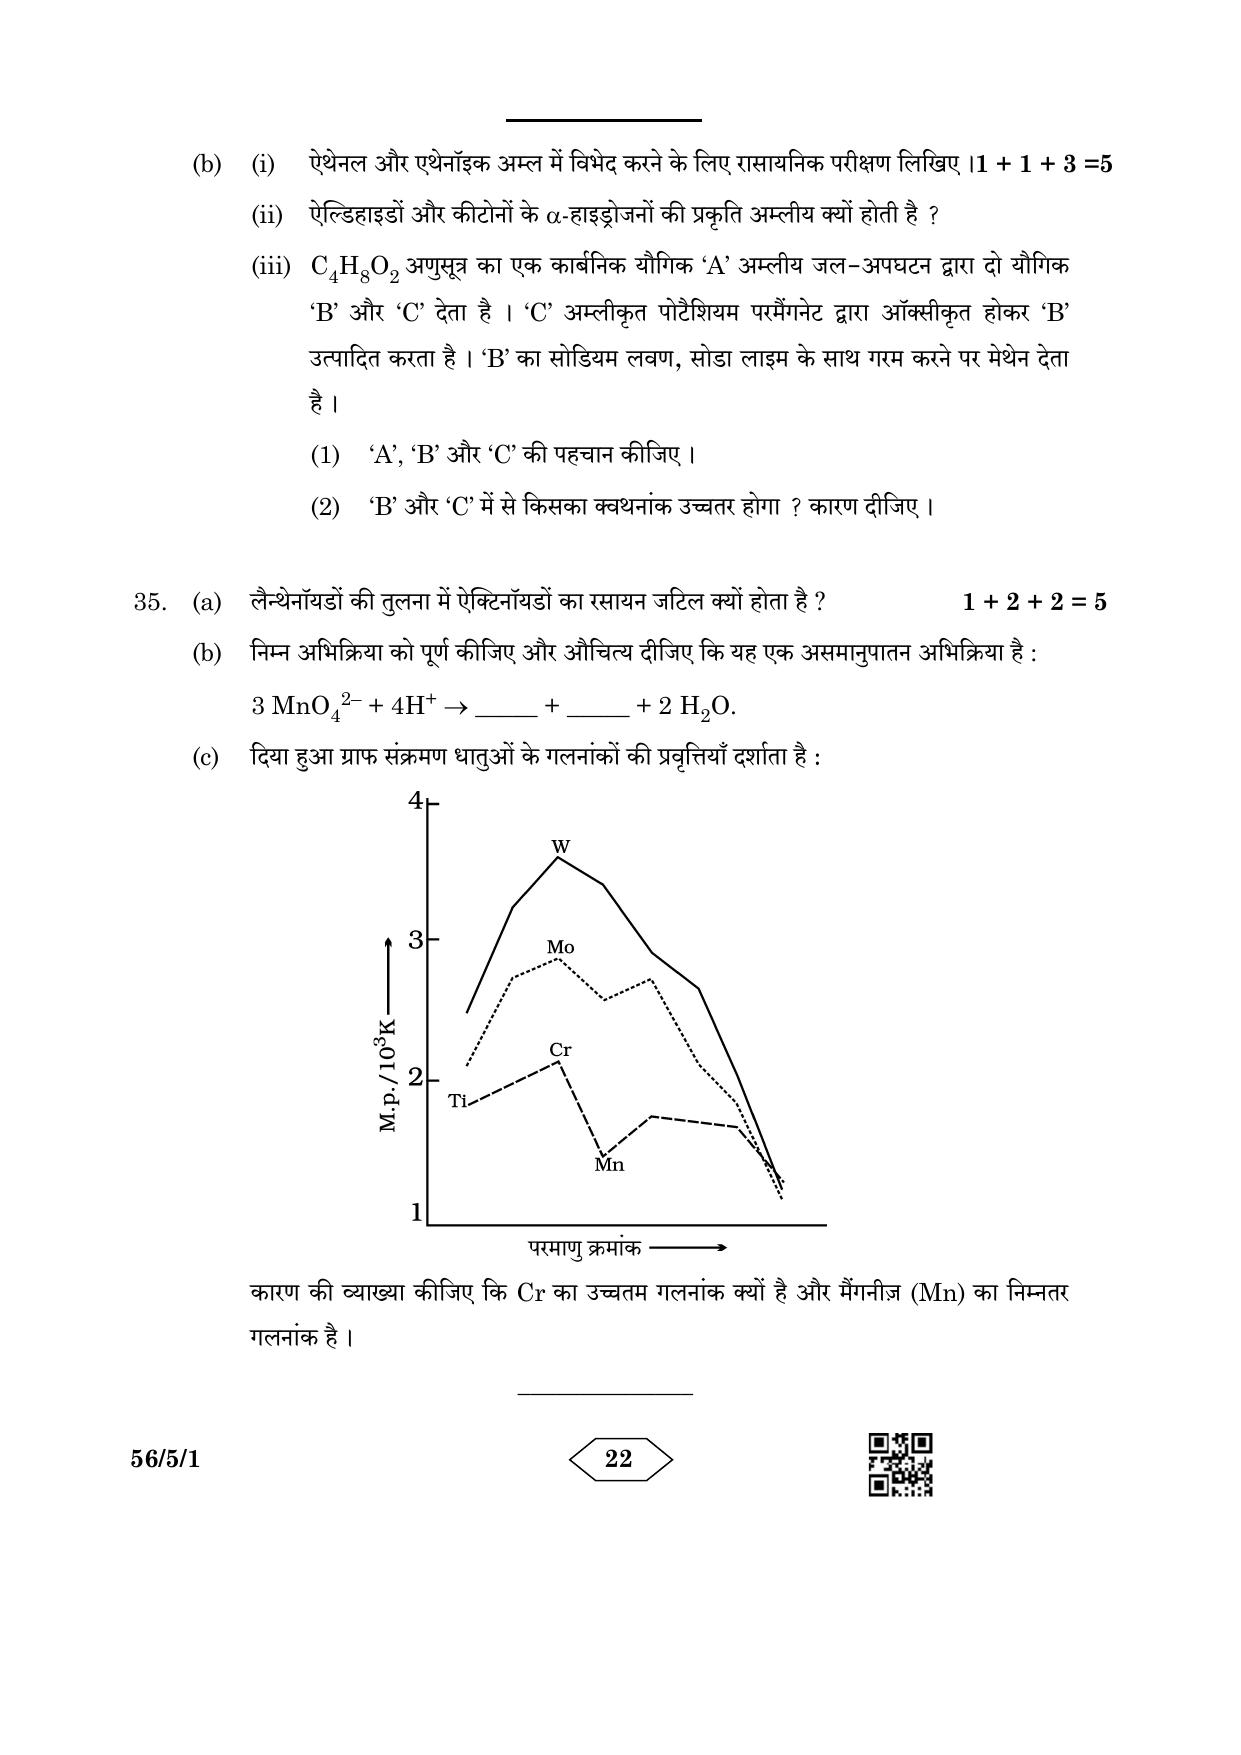 CBSE Class 12 56-5-1 Chemistry 2023 Question Paper - Page 22